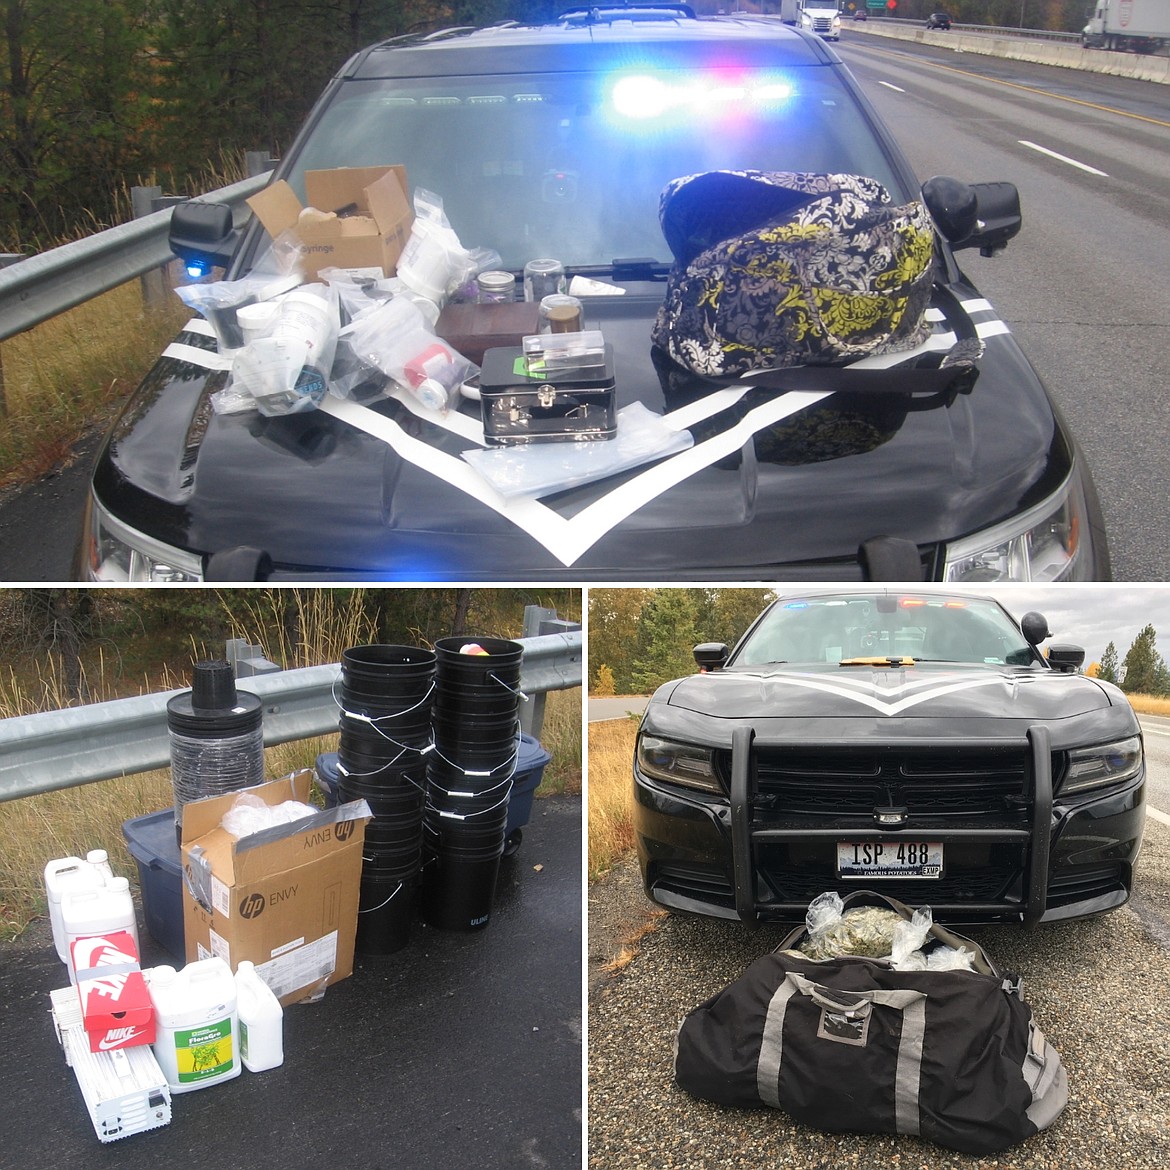 Top: Miscellaneous marijuana and illegally possessed prescription pills. Bottom left: Equipment used to create an illegal marijuana growing operation. One plant alone is capable of growing up to a pound of marijuana itself. Bottom right: A hockey bag full of marijuana.